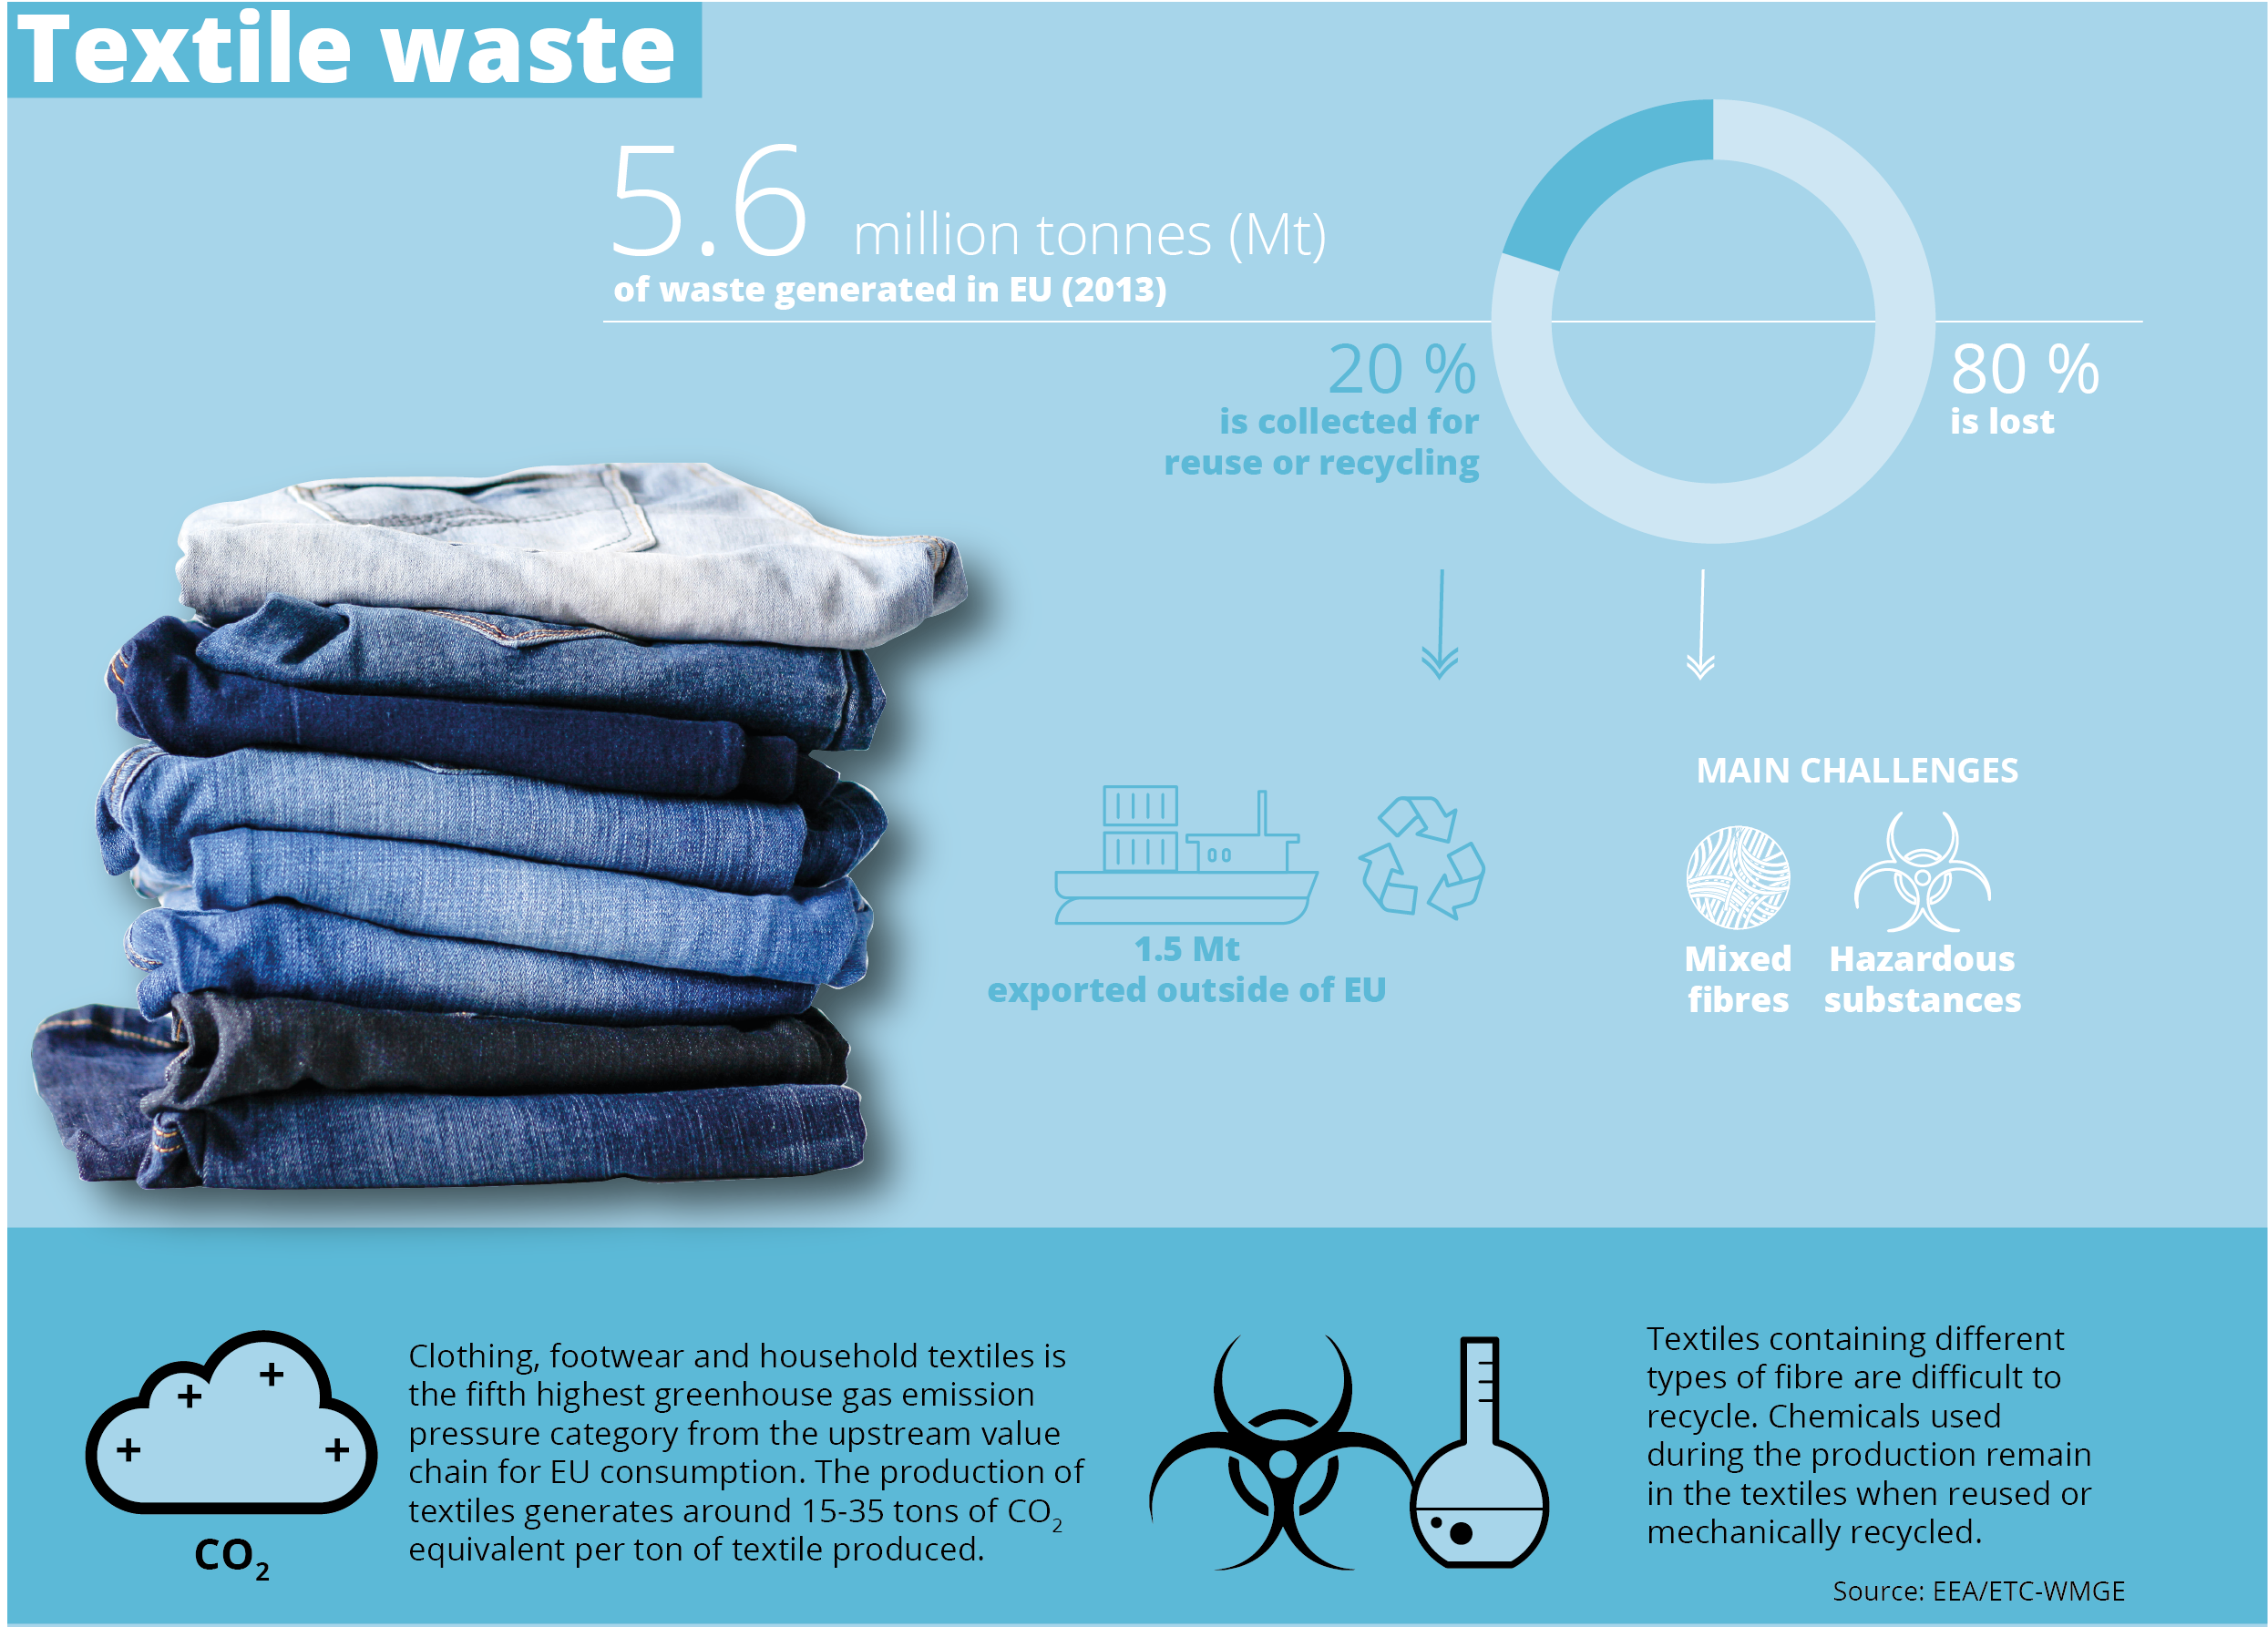 textile recycling business plan